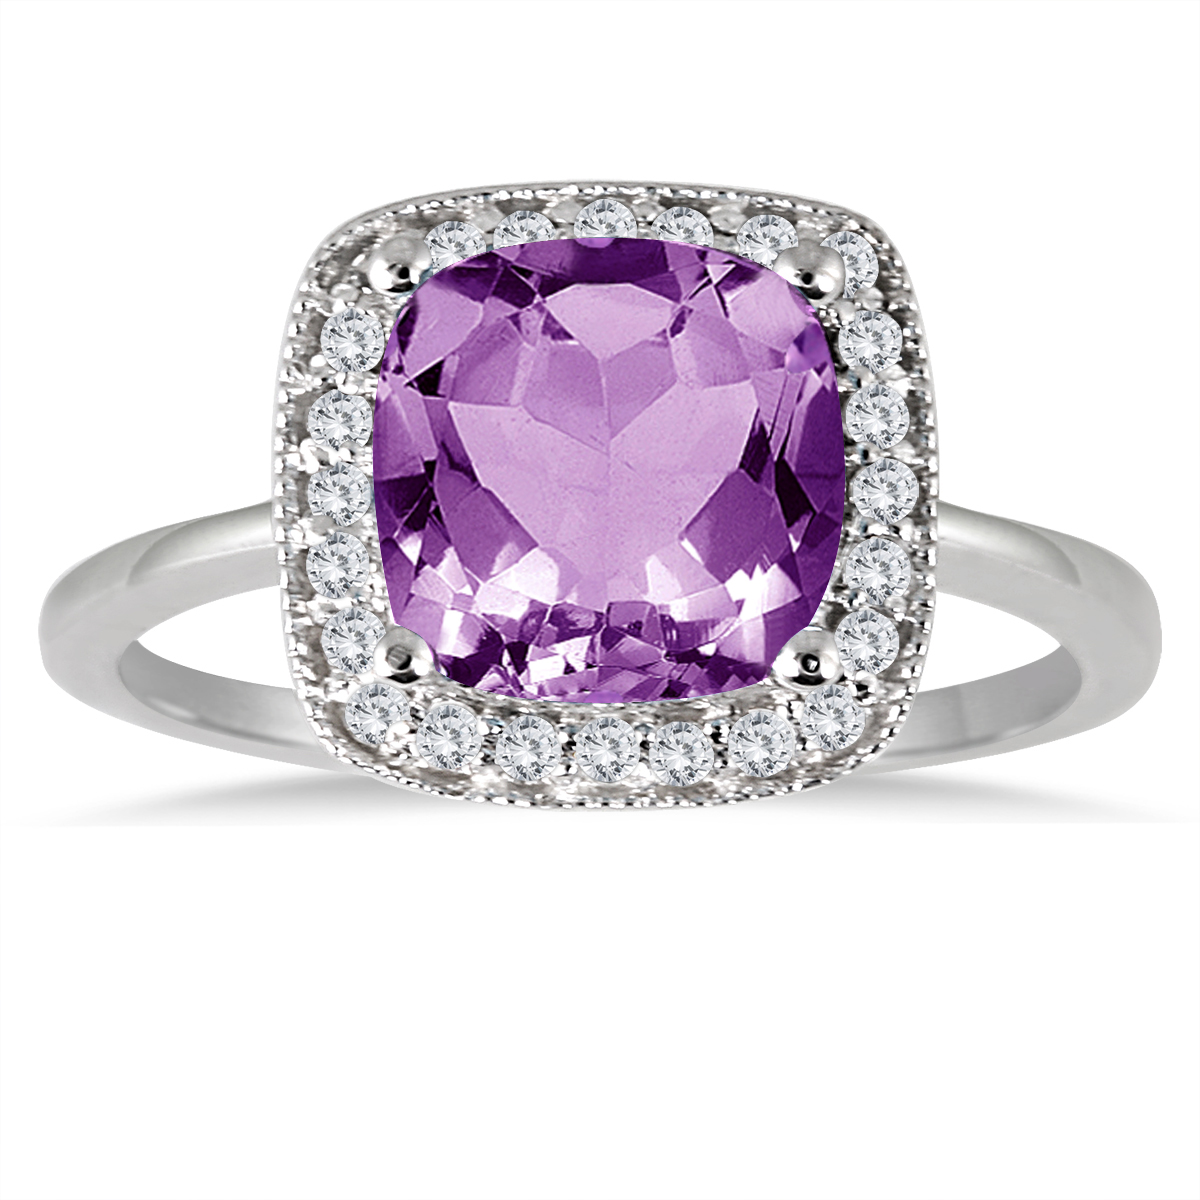 1.35 Carat Cushion Cut Amethyst and Diamond Ring in 14K White Gold